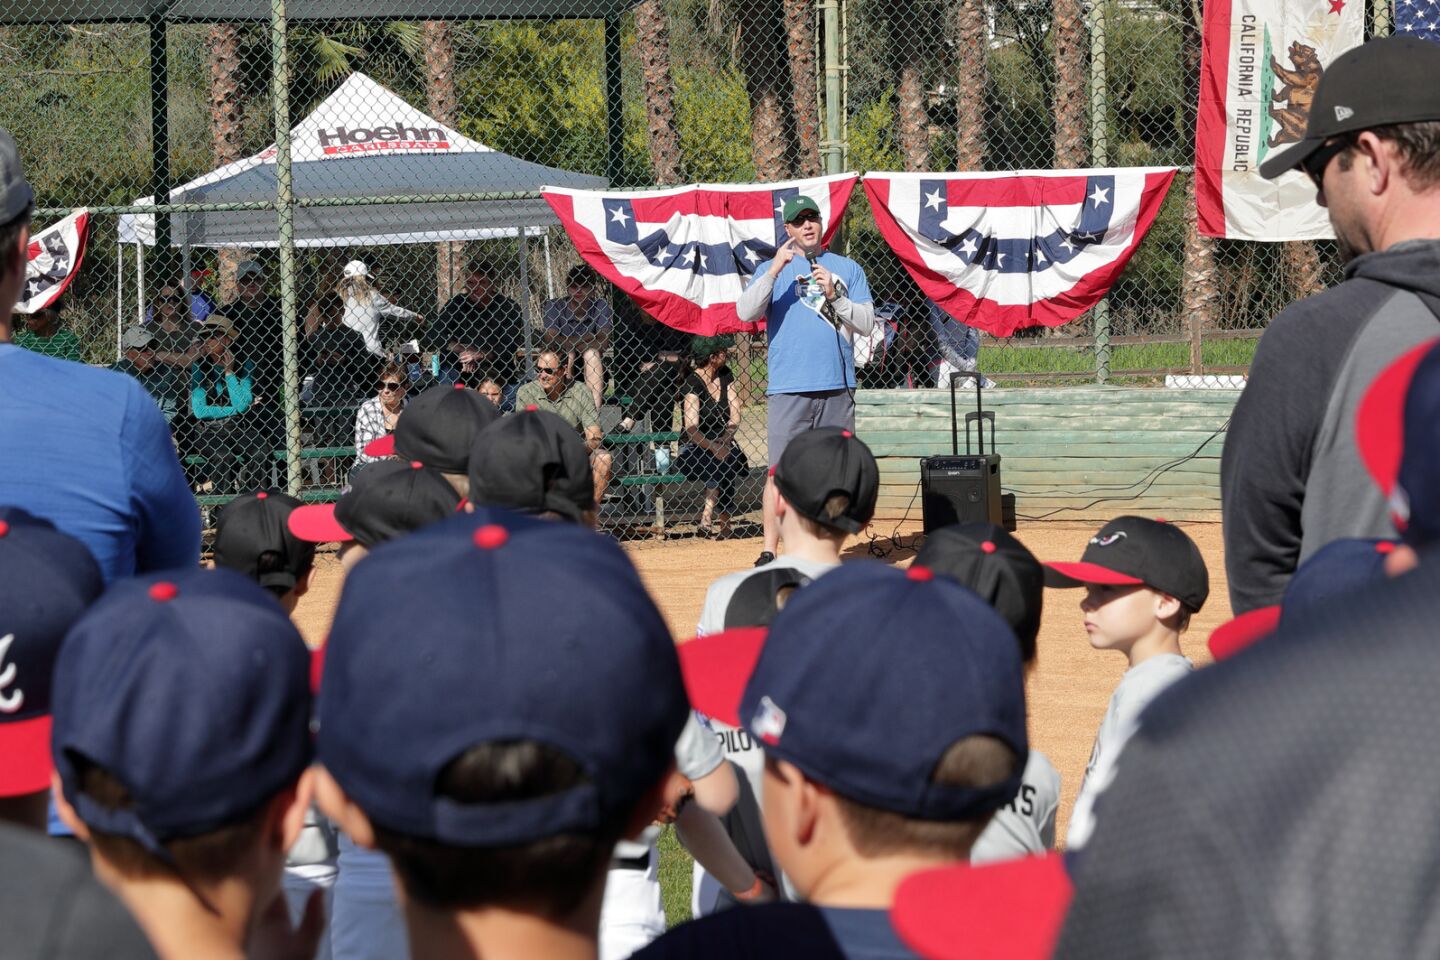 Tyler Seltzer speaks at the 56th anniversary of the RSF Little League